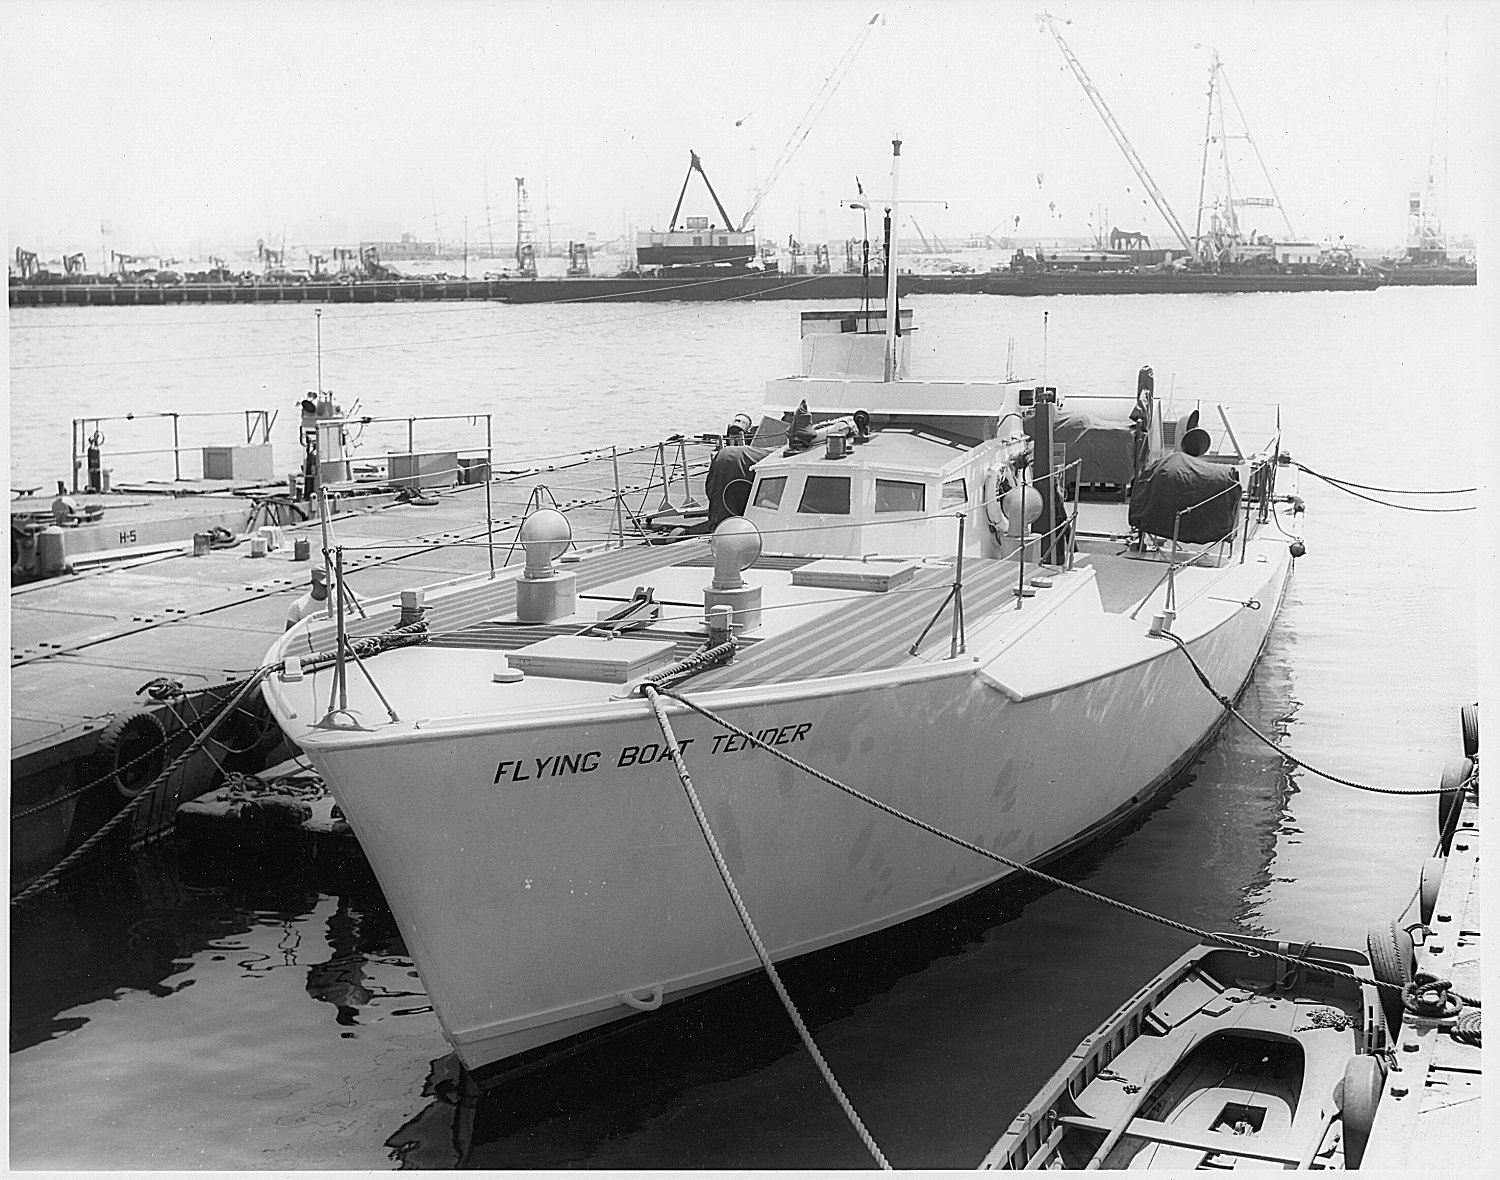 The former PT-694, a 70-foot Vosper, with the Hughes Tool Company as a service boat in the H-4 Flying Boat project, 1950s. Later sold to Universal Studios and painted as PT-73 for the opening credits of “McHale’s Navy.”